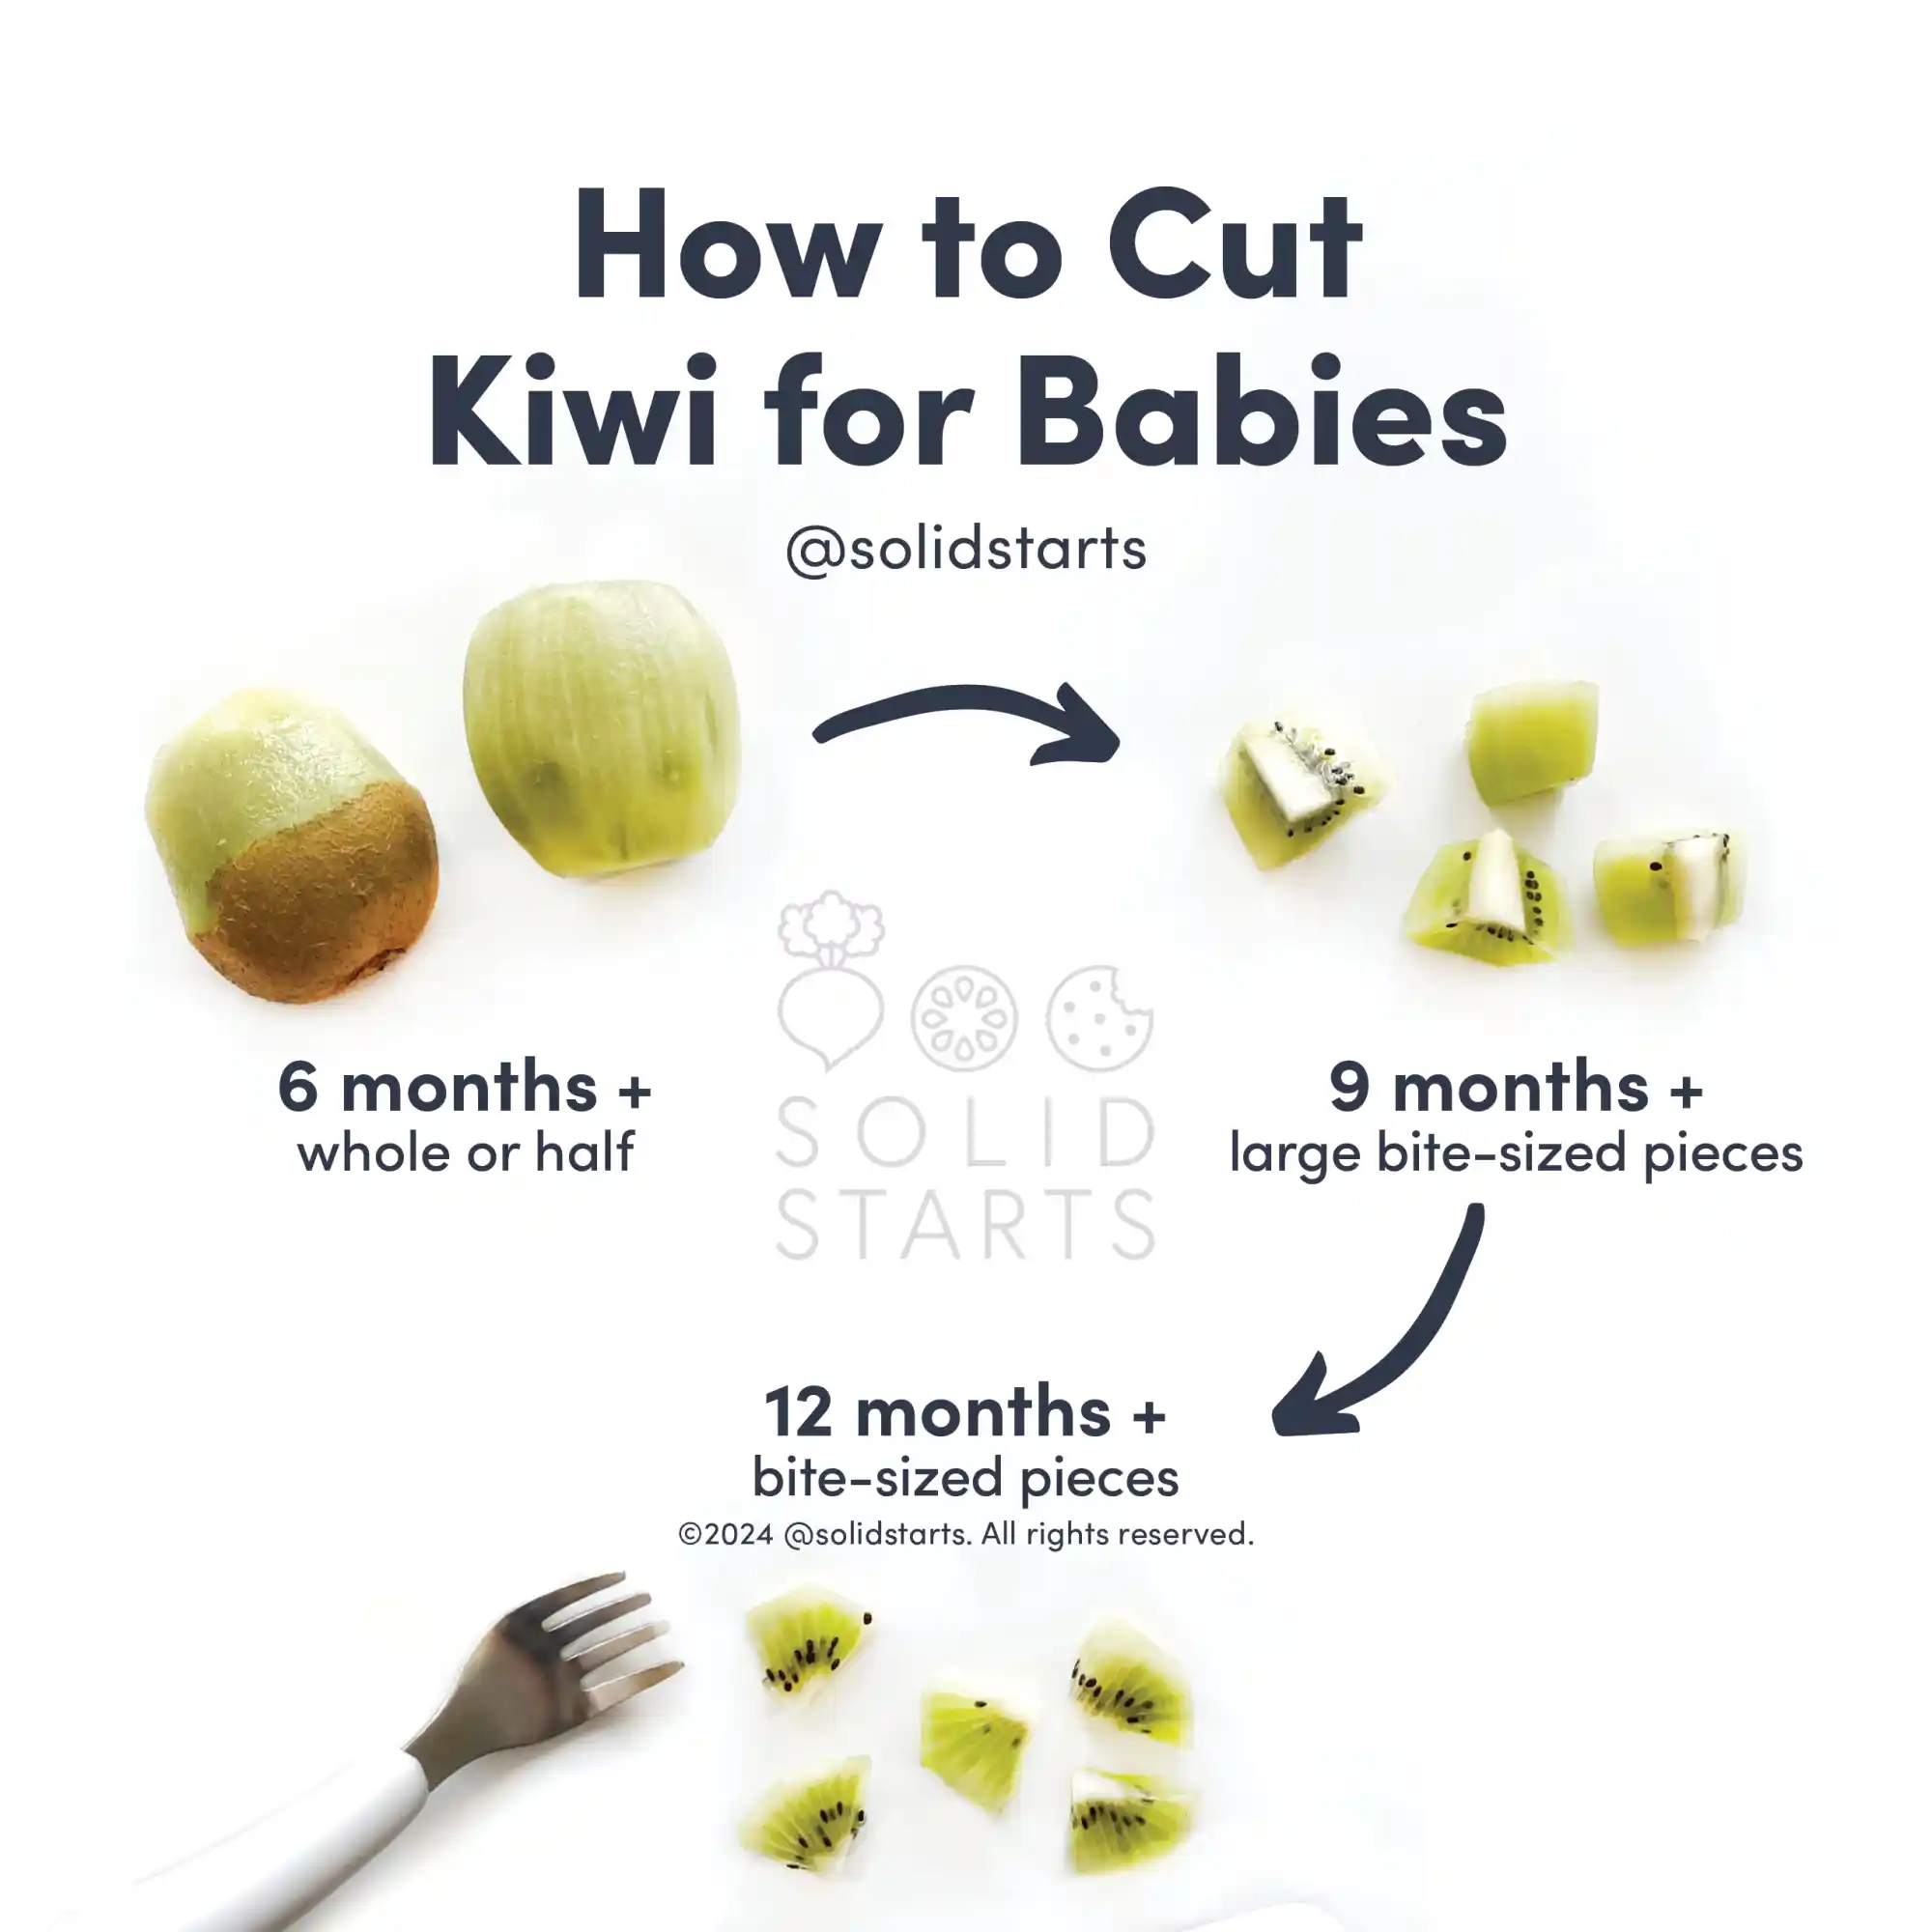 A Solid Starts infographic with the header How to Cut Kiwi for Babies: whole or halved for 6-8 months+, large bite-size pieces for 9-11 mos+, and bite-sized for 12-24 months+